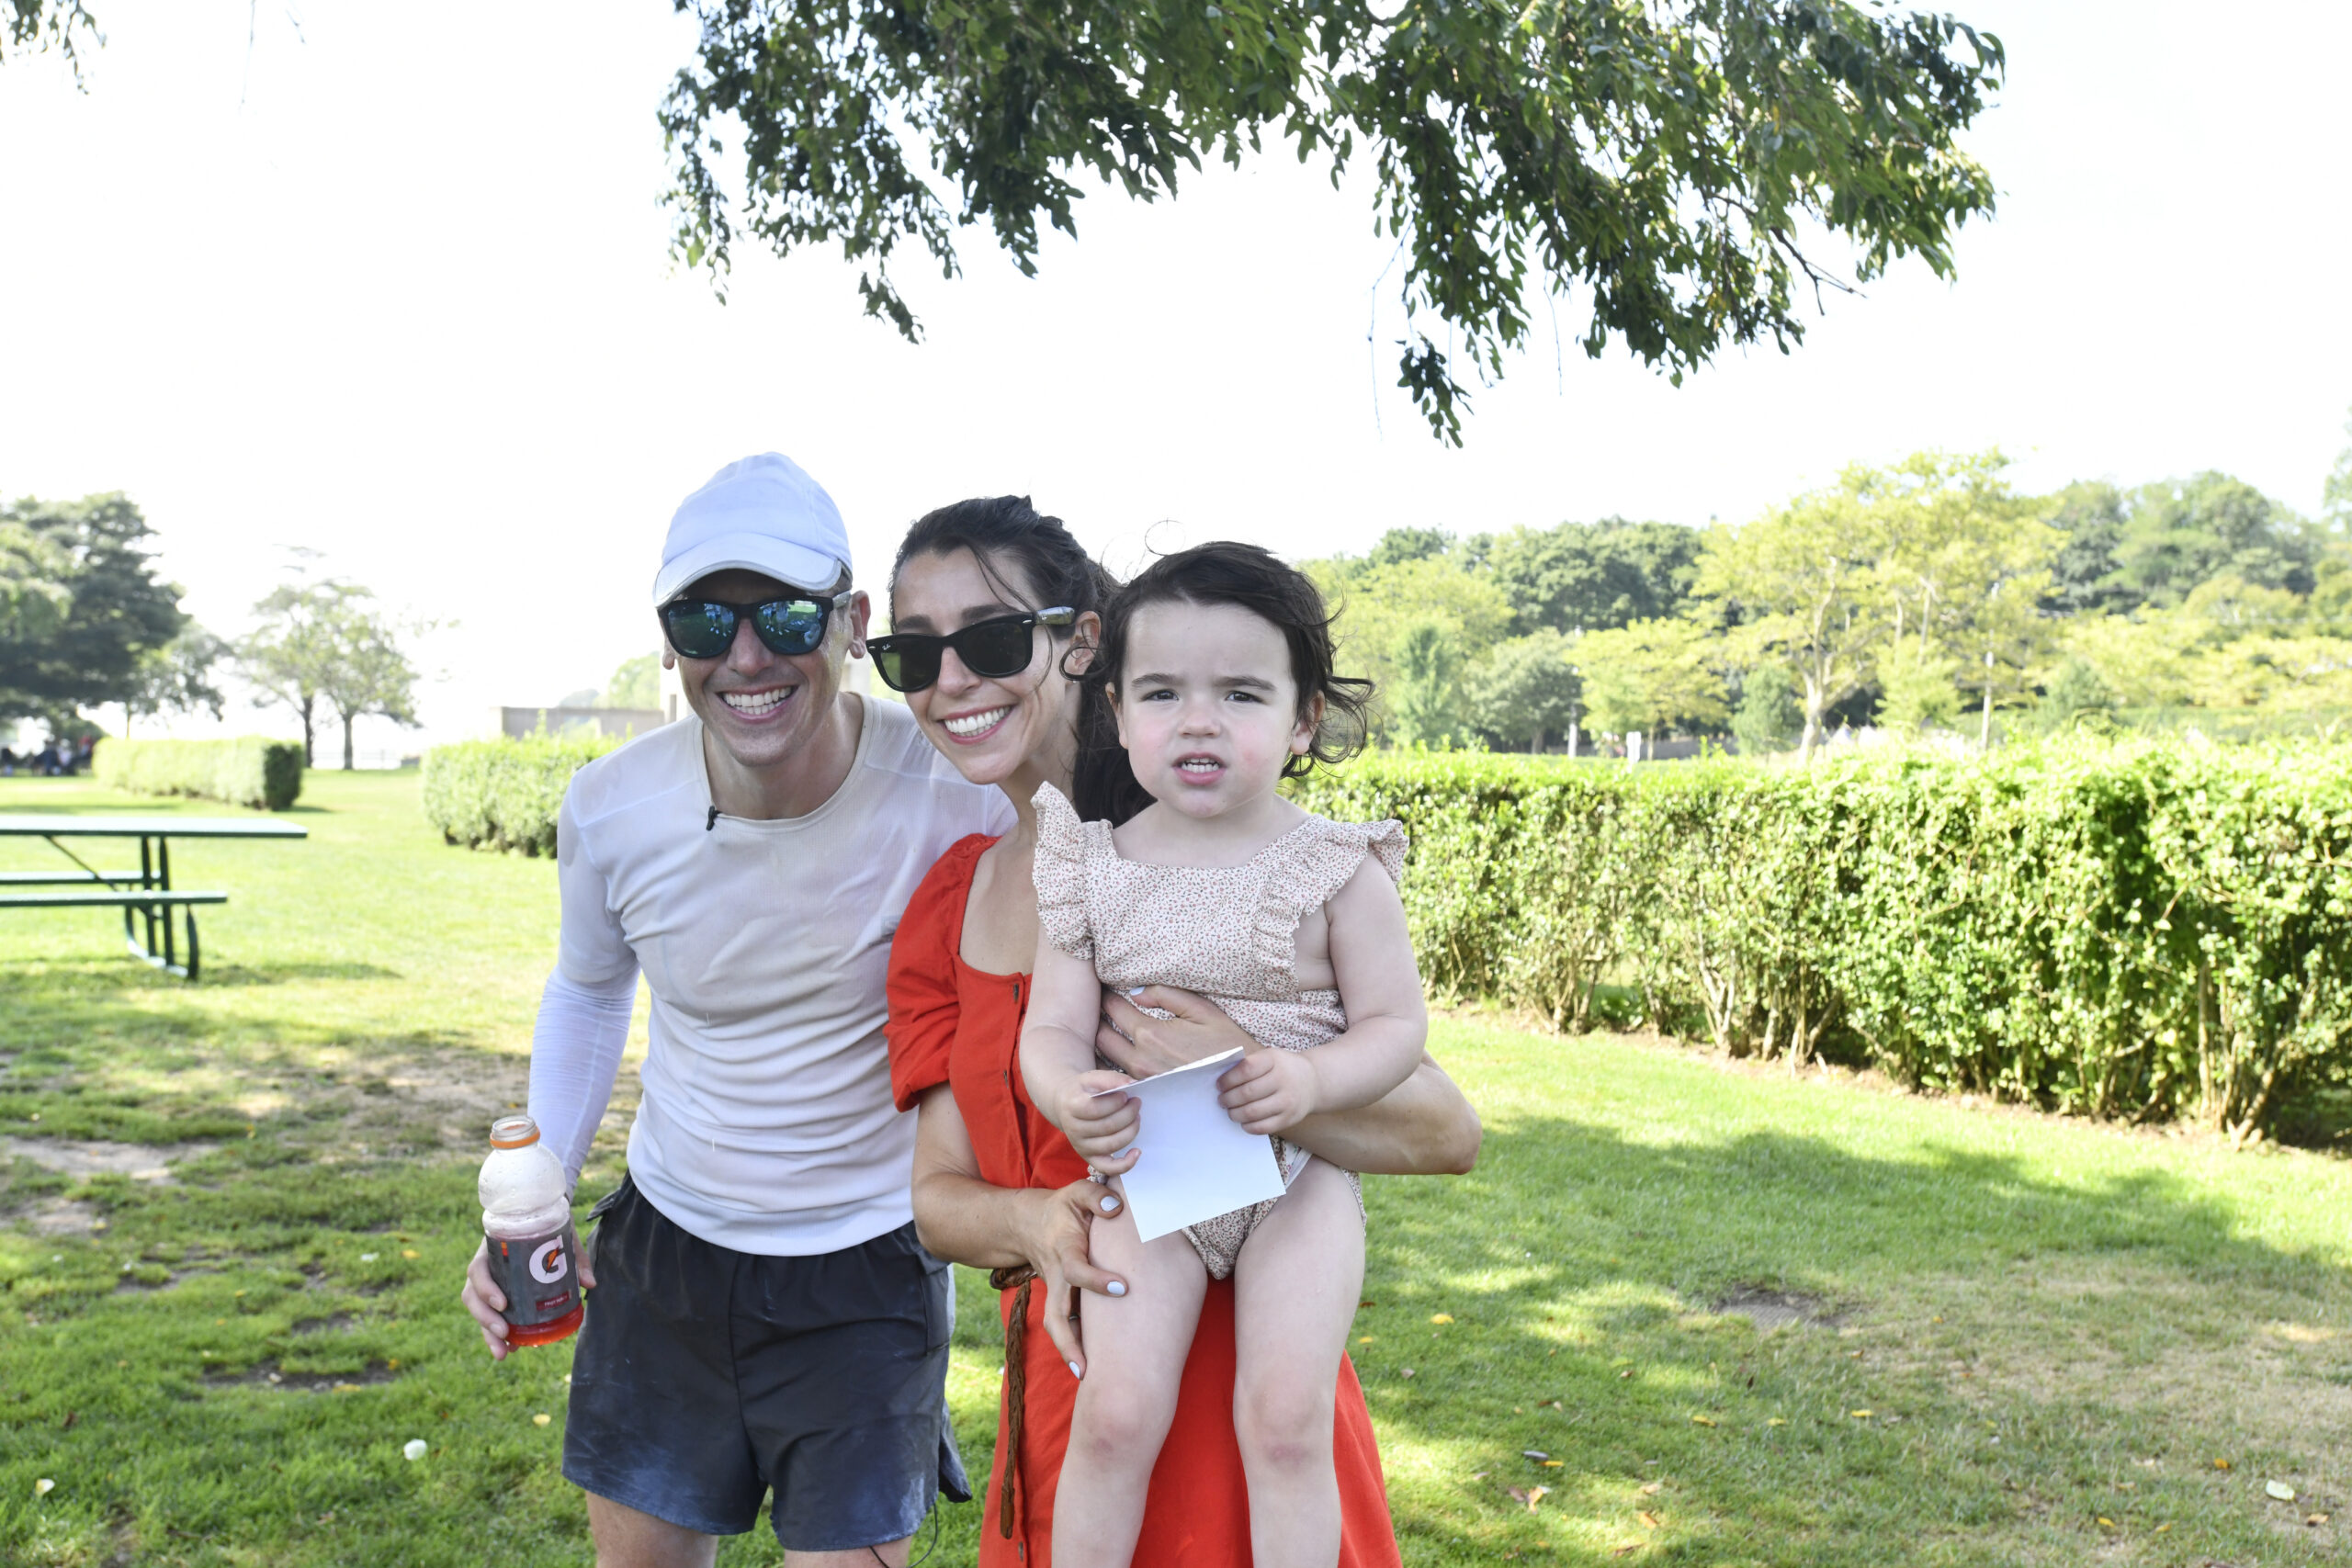 Oz Pearlman stops briefly in Southampton Village on August 4, to visit with his Elisa Rosen and daughter Esme on his way from Montauk to Times Square.  DANA SHAW